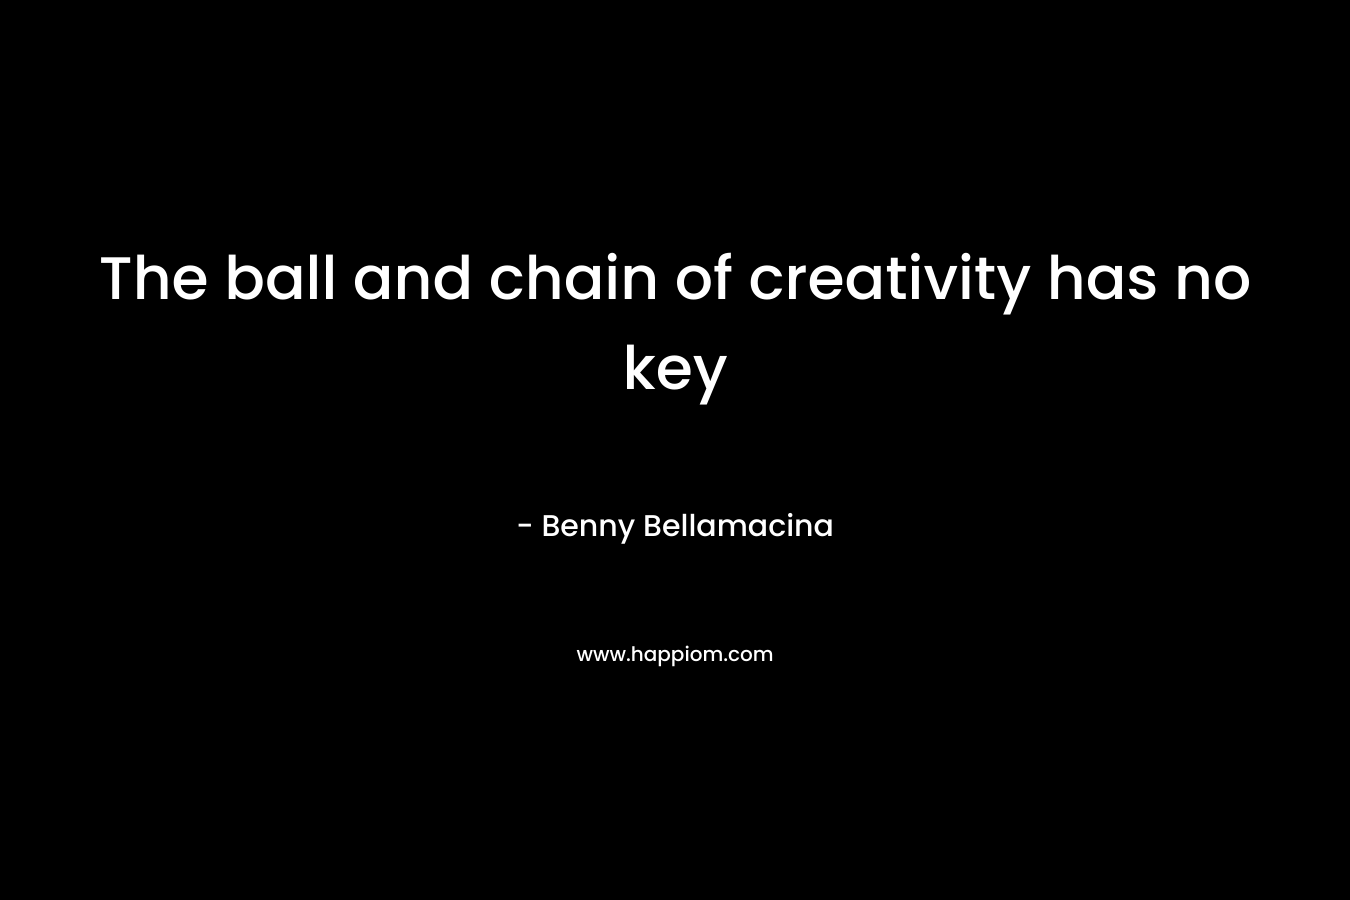 The ball and chain of creativity has no key